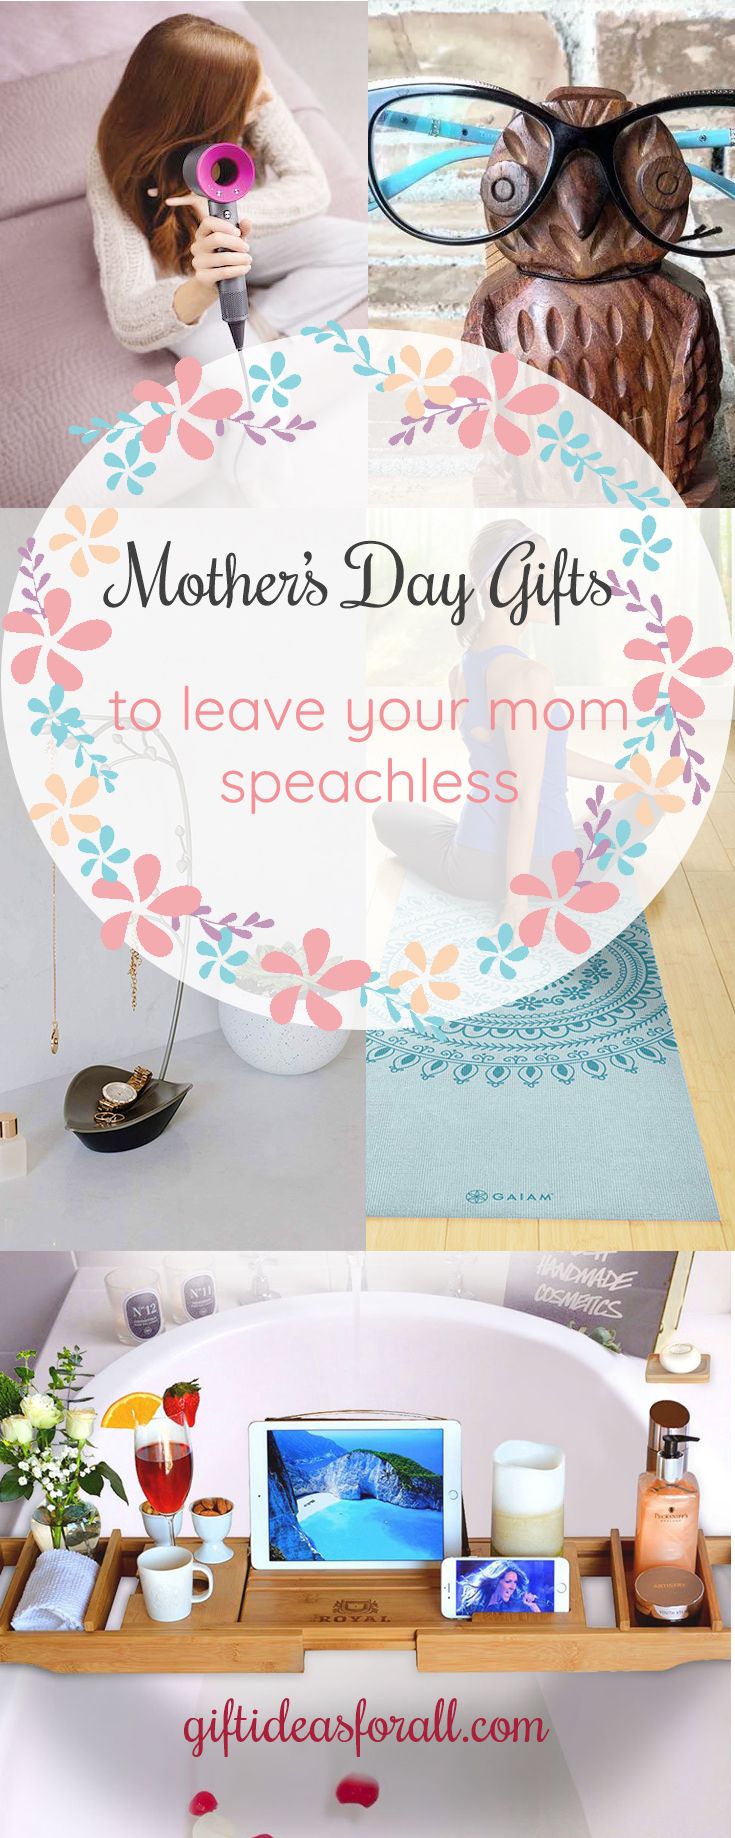 11 Personal Care Gift Ideas to Leave Your Mom Speechless. #Gifts #Mothersday #Mo...